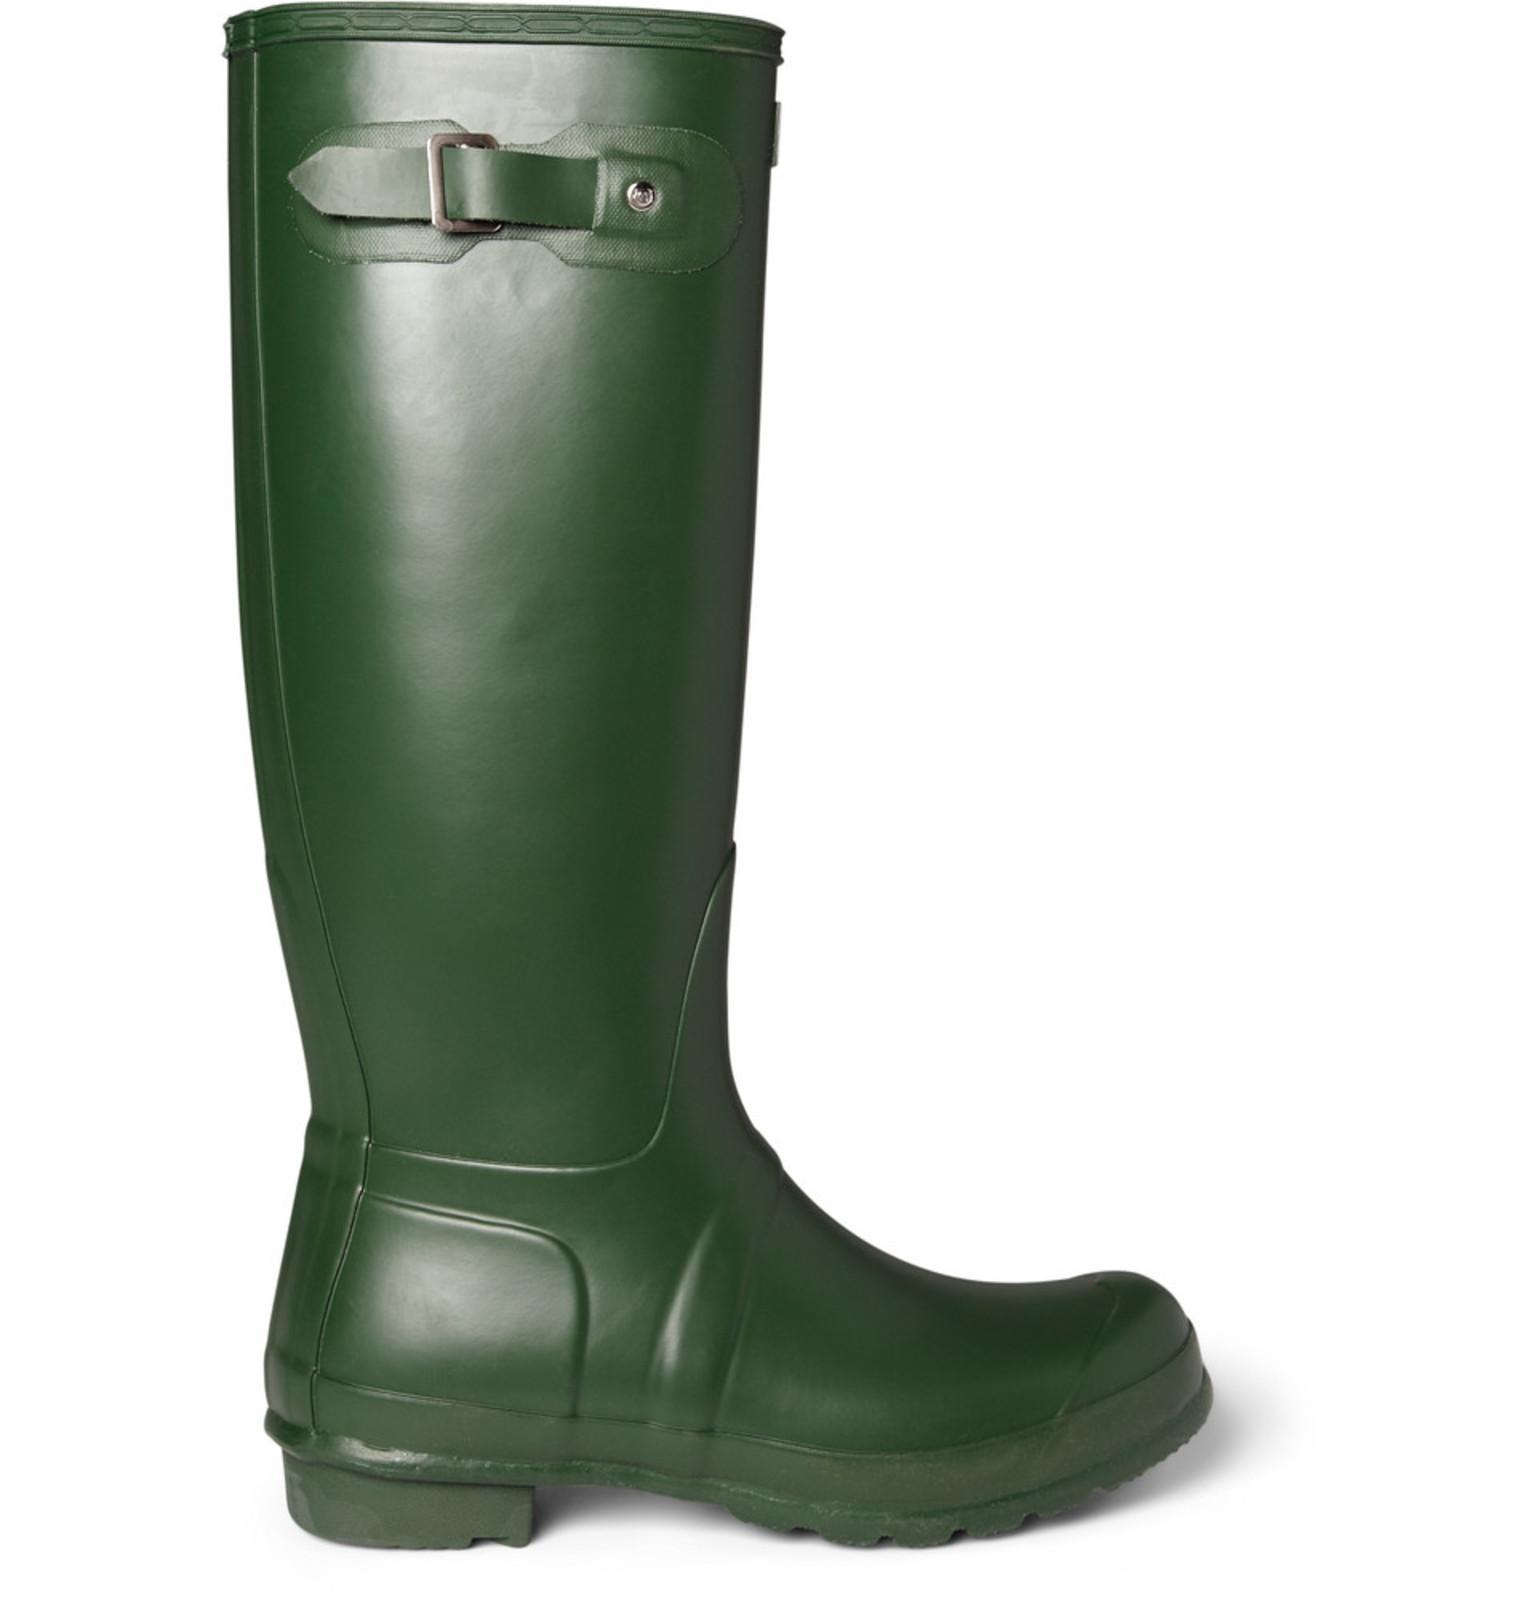 Lyst - HUNTER Original Tall Wellington Boots in Natural for Men